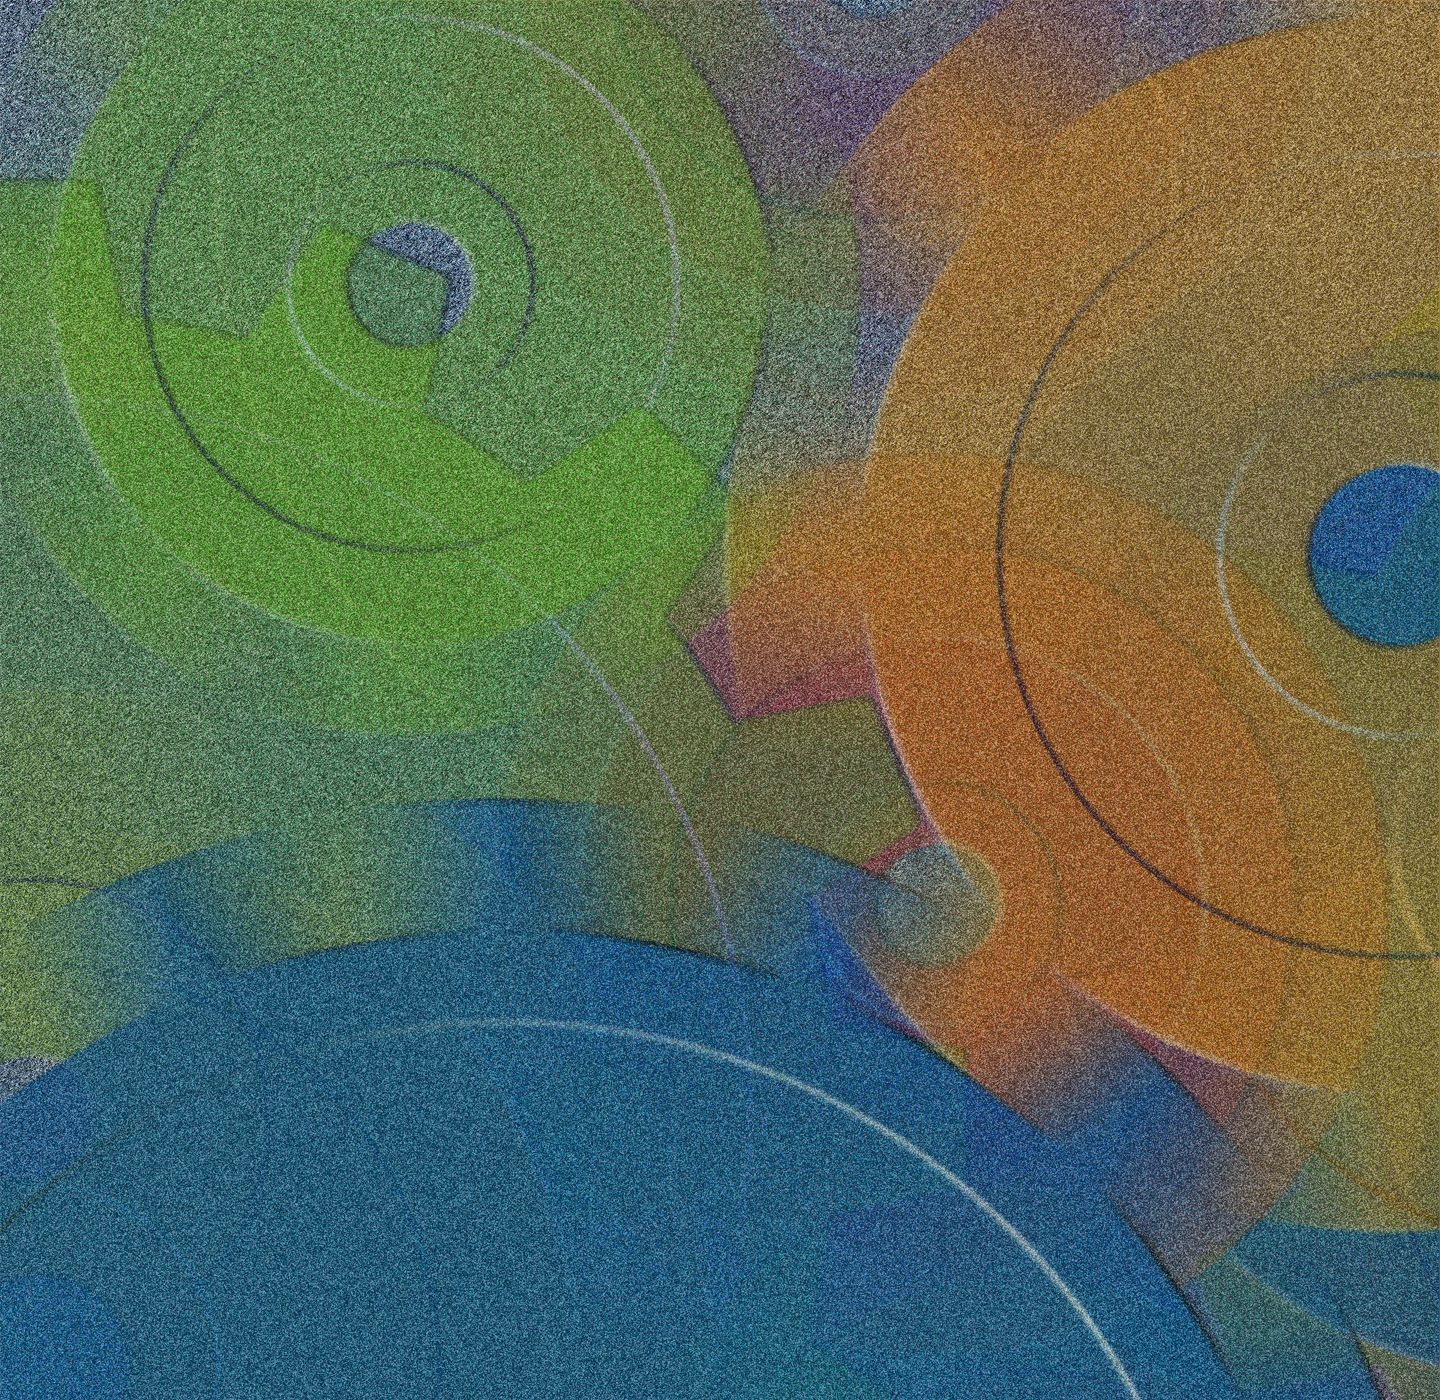 Distorted still snippet of a colorful abstract digital painting of cogwheels in motion.